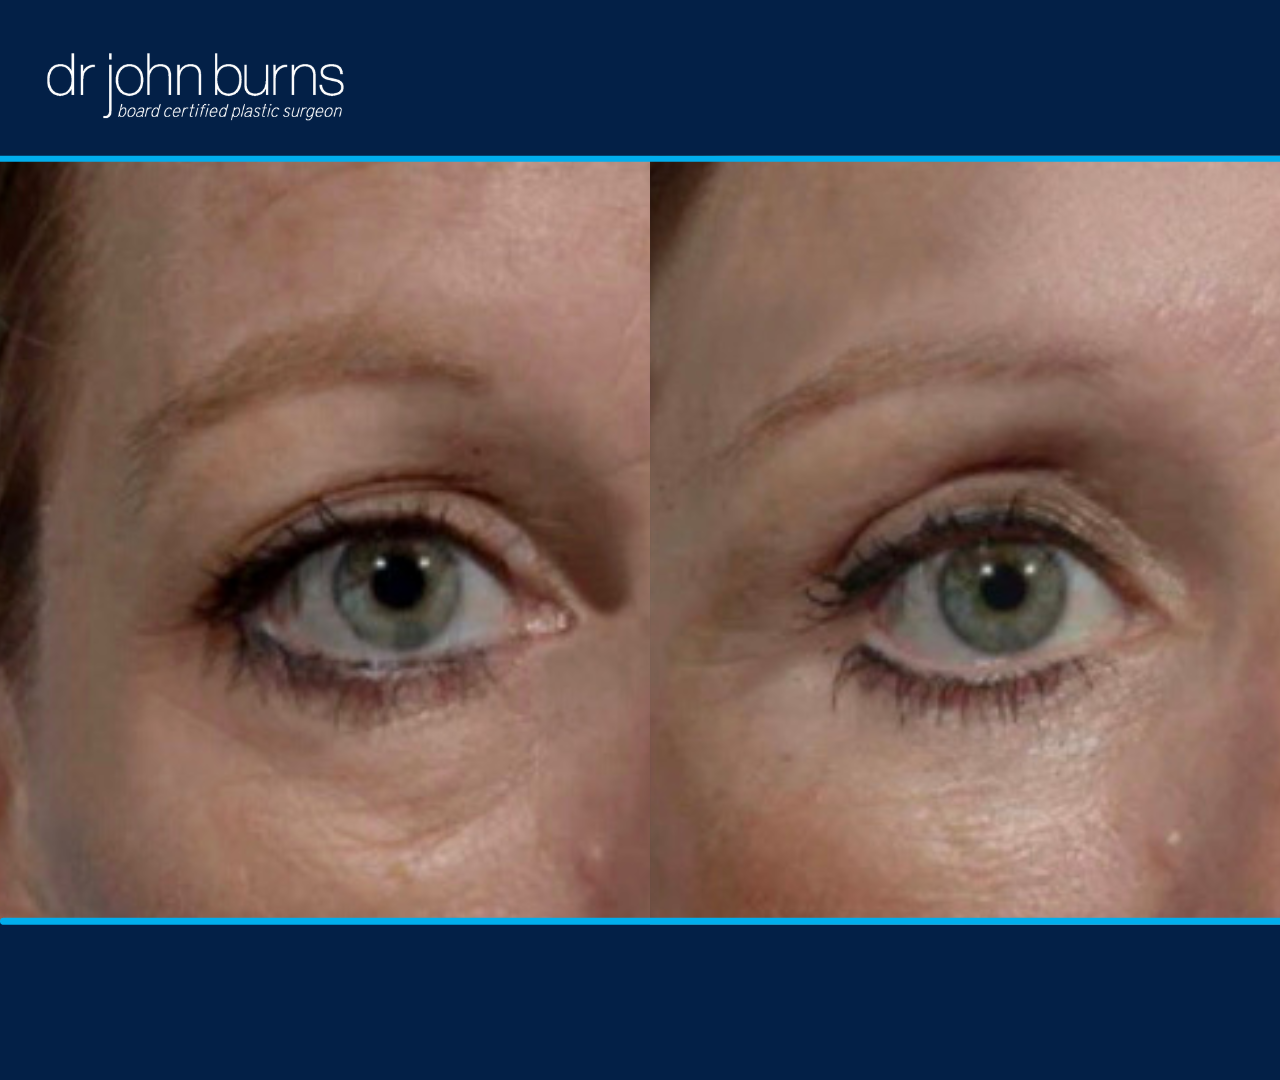 right eye view | before and after eyelid surgery results by Dr. John Burns